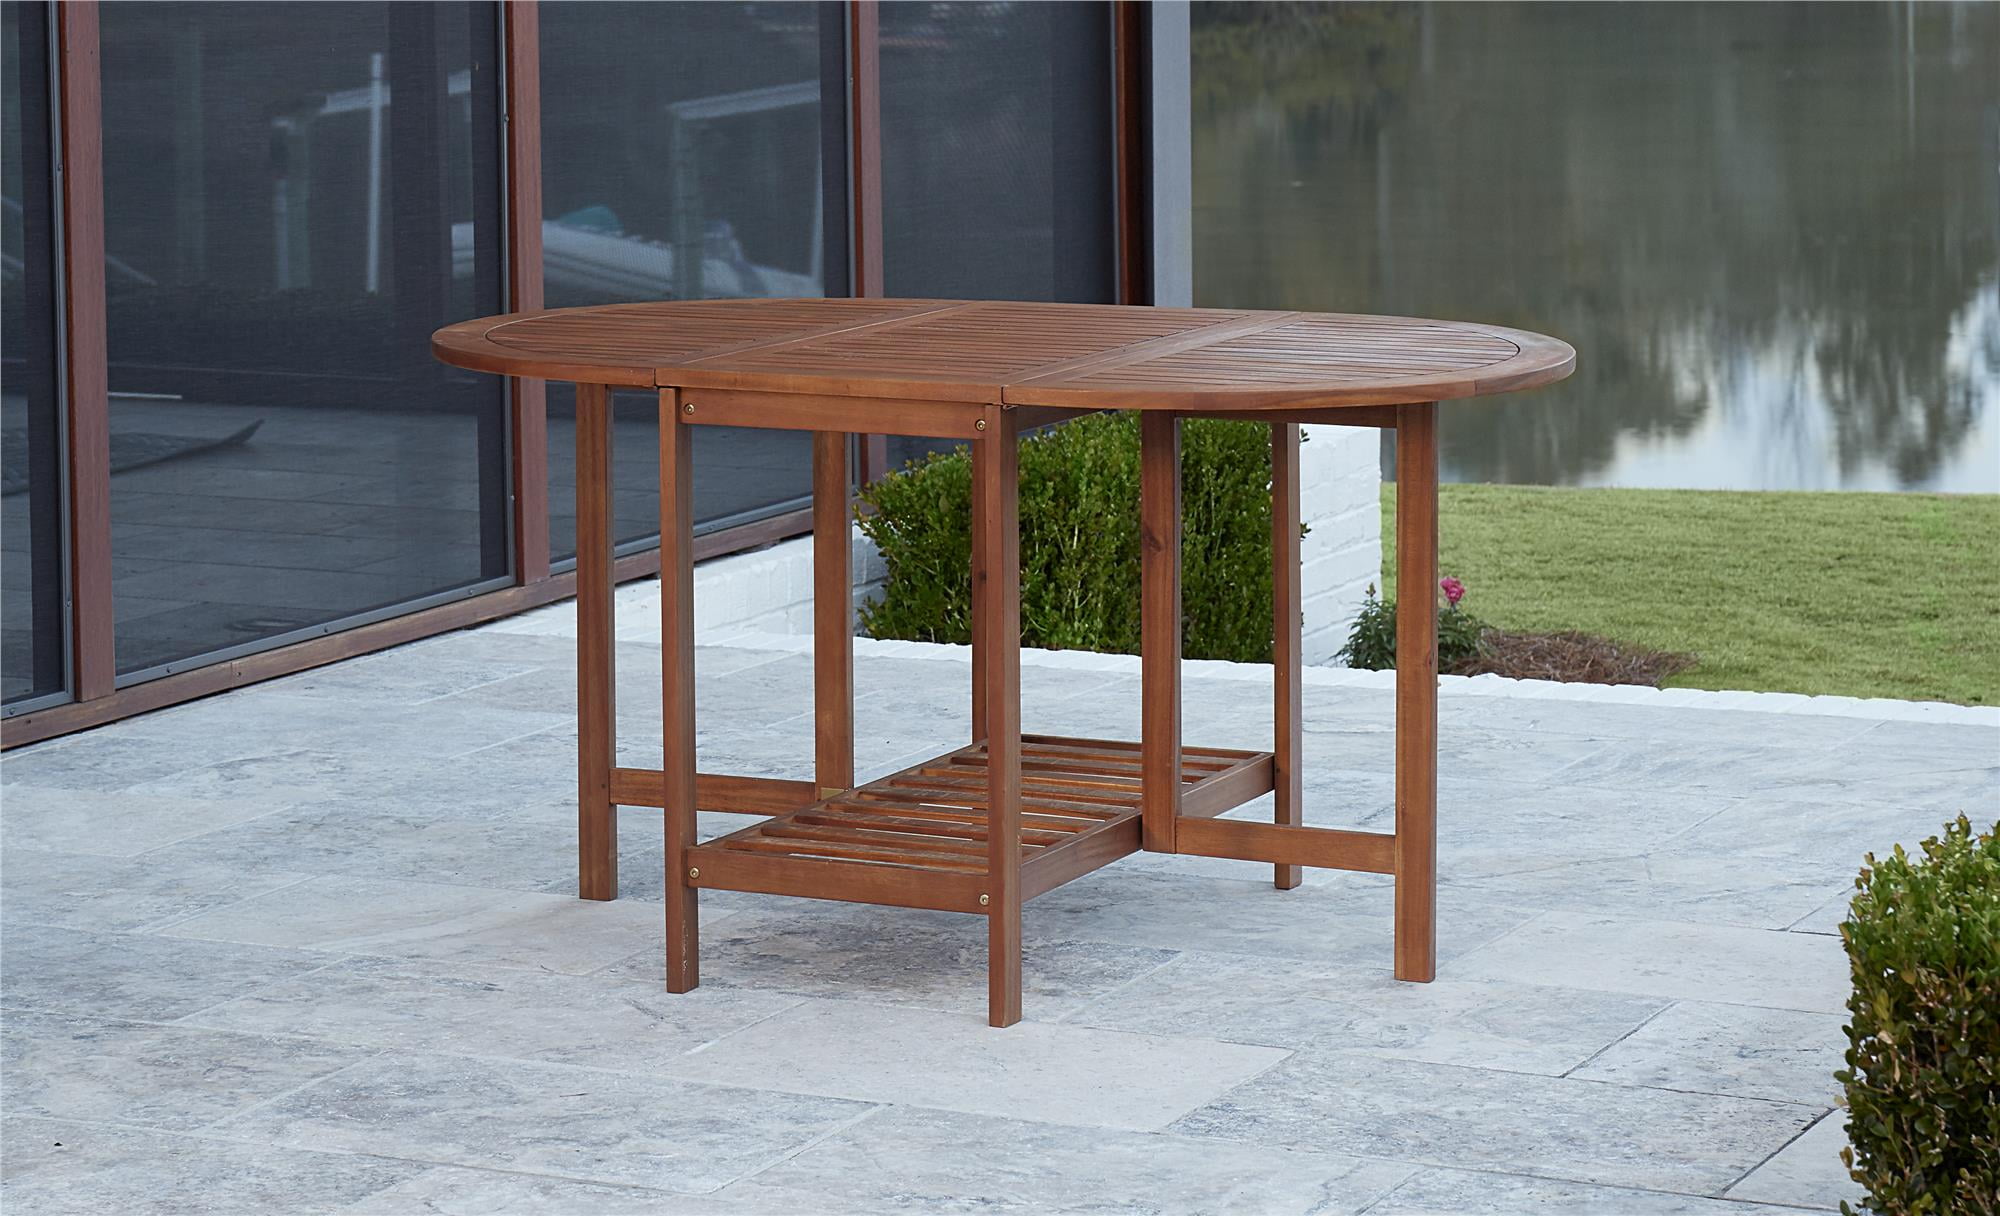  fold away outdoor table and chairs